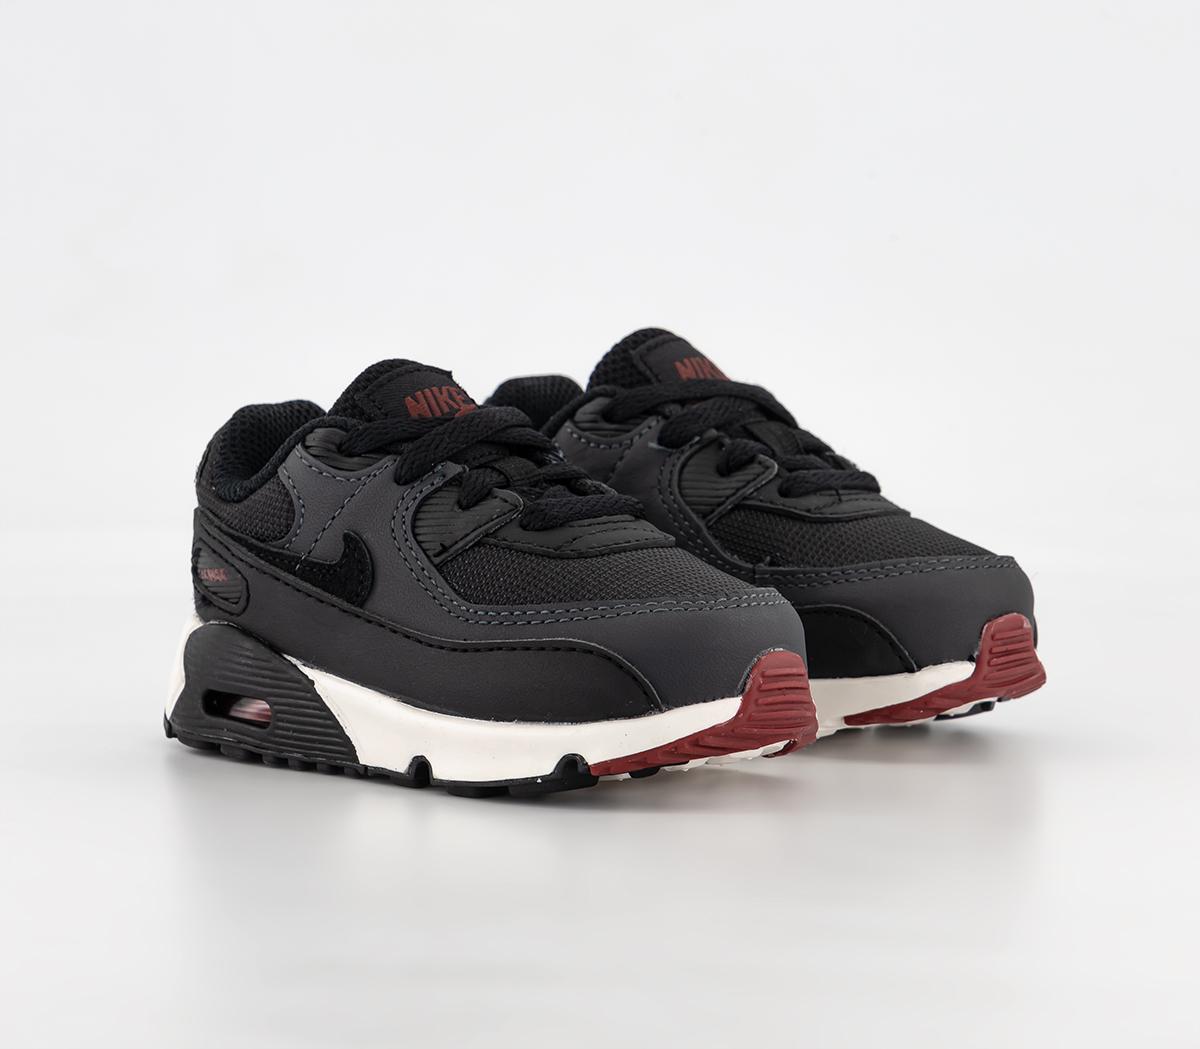 Nike Kids Air Max 90 Trainers Anthracite Black Team Red Summit White, 5.5 Infant